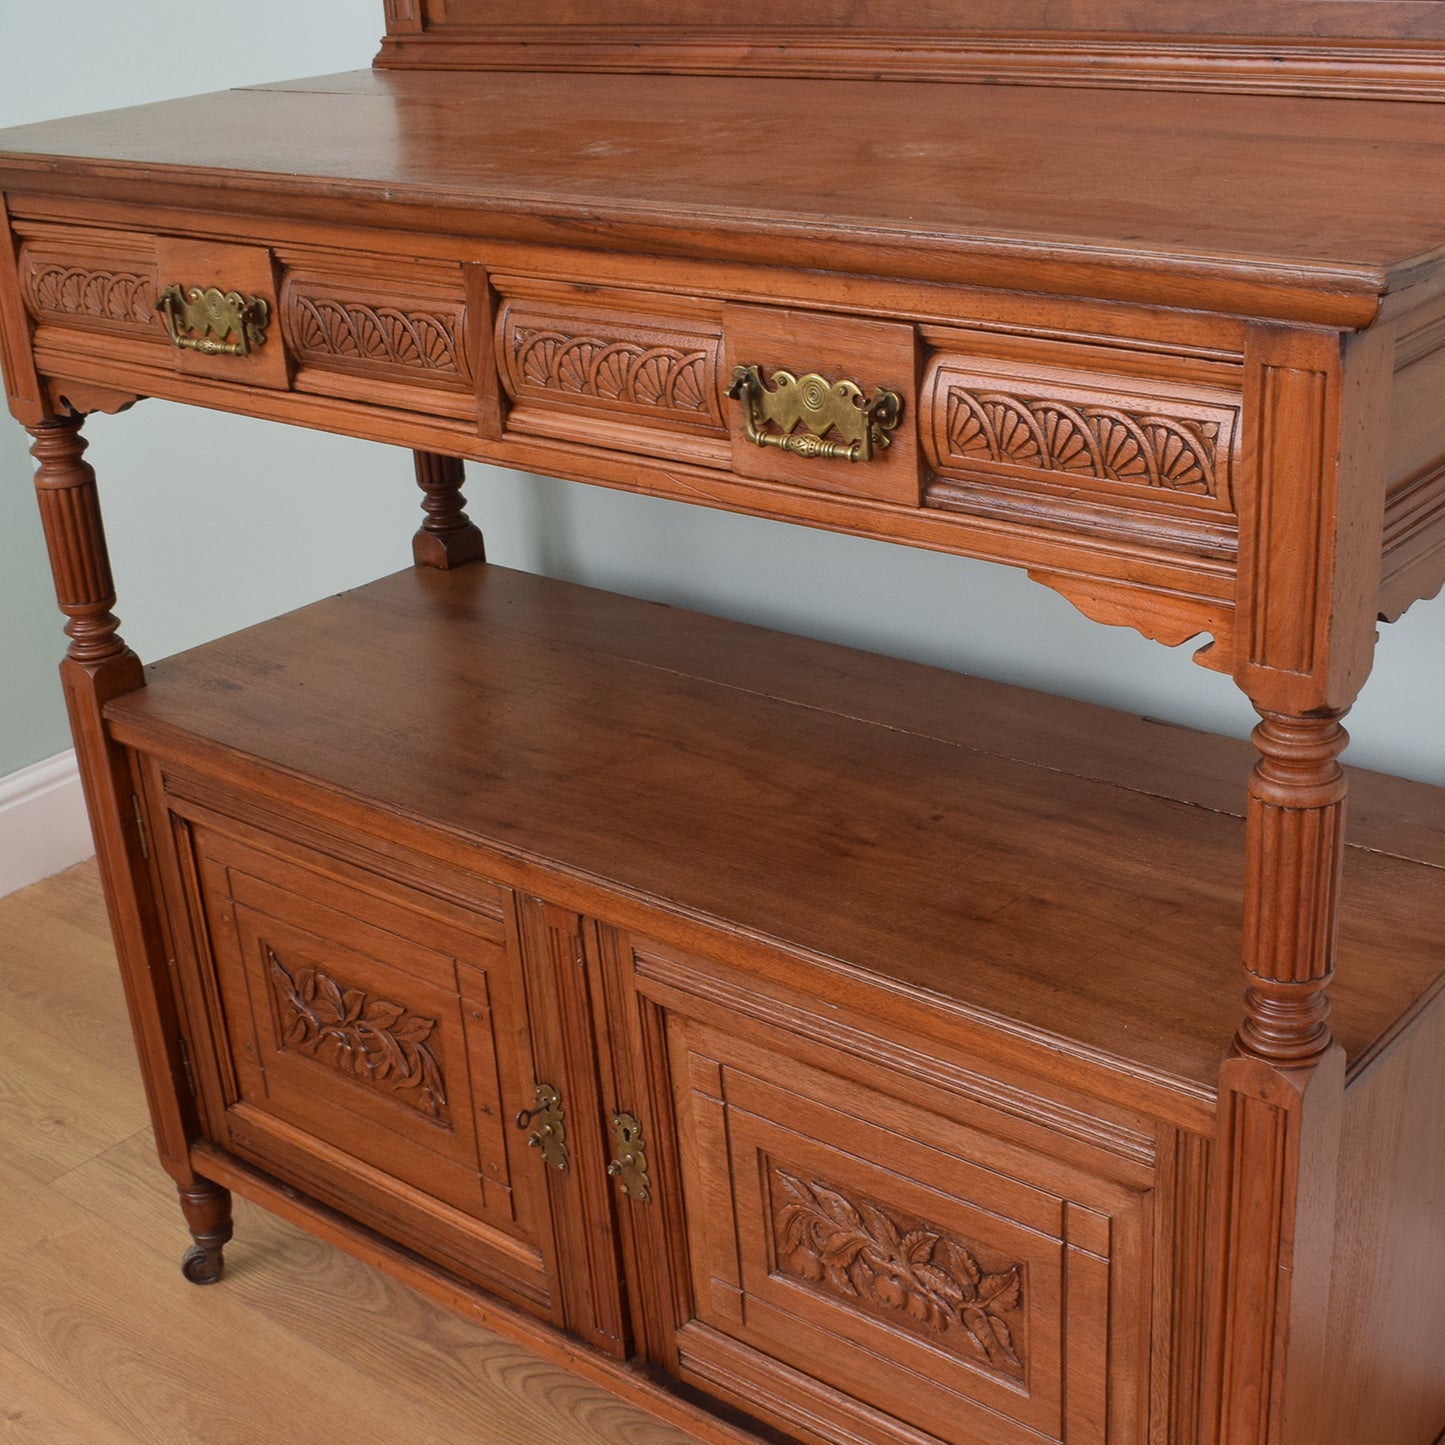 Mahogany Sideboard with Intricate Carvings